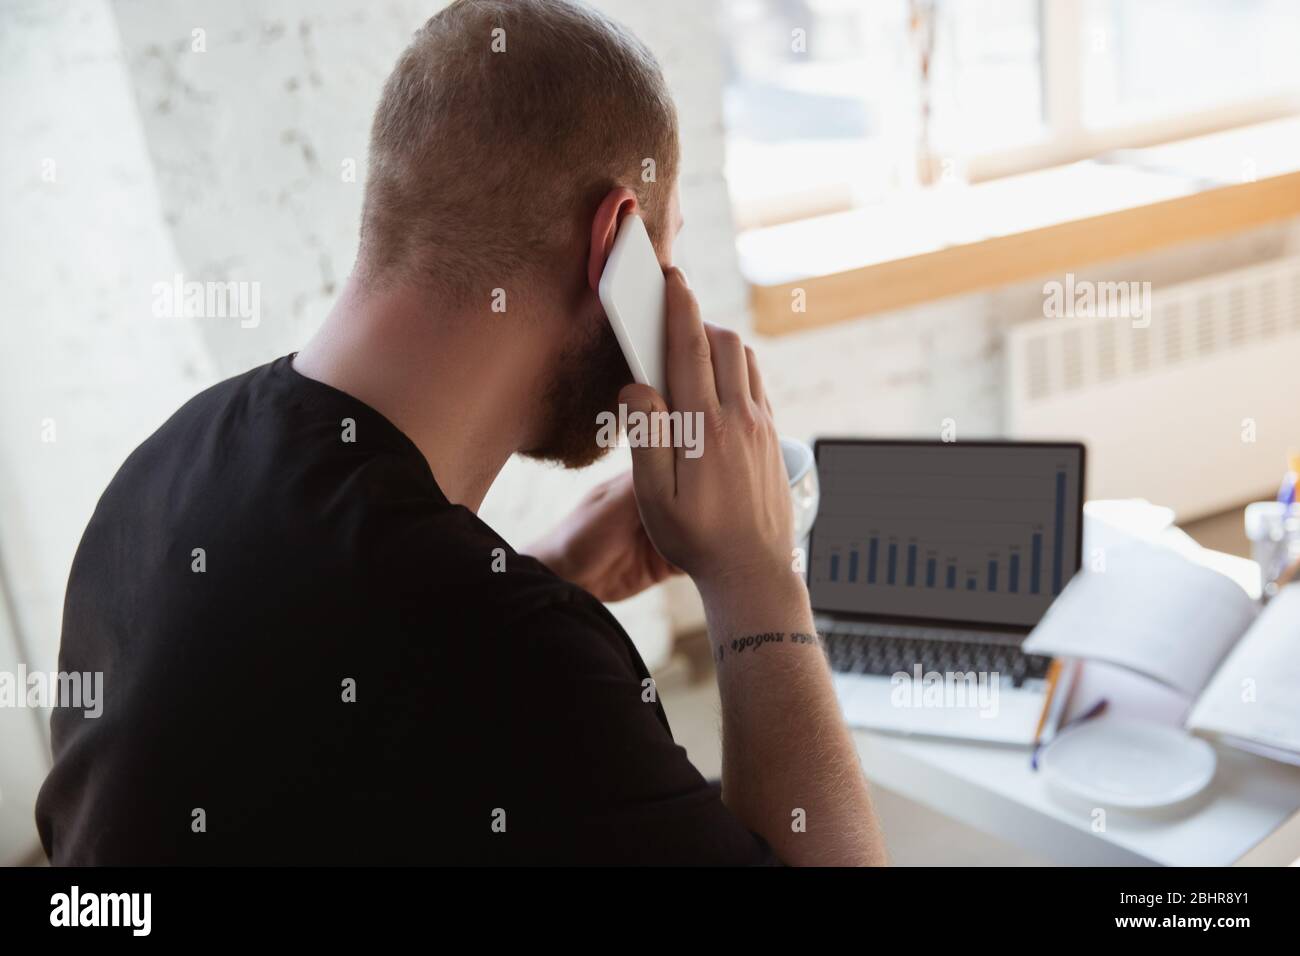 Young man studying at home during online courses for analytics, financists, economists. Getting profession while isolated, quarantine against coronavirus spreading. Using laptop, smartphone, devices. Stock Photo